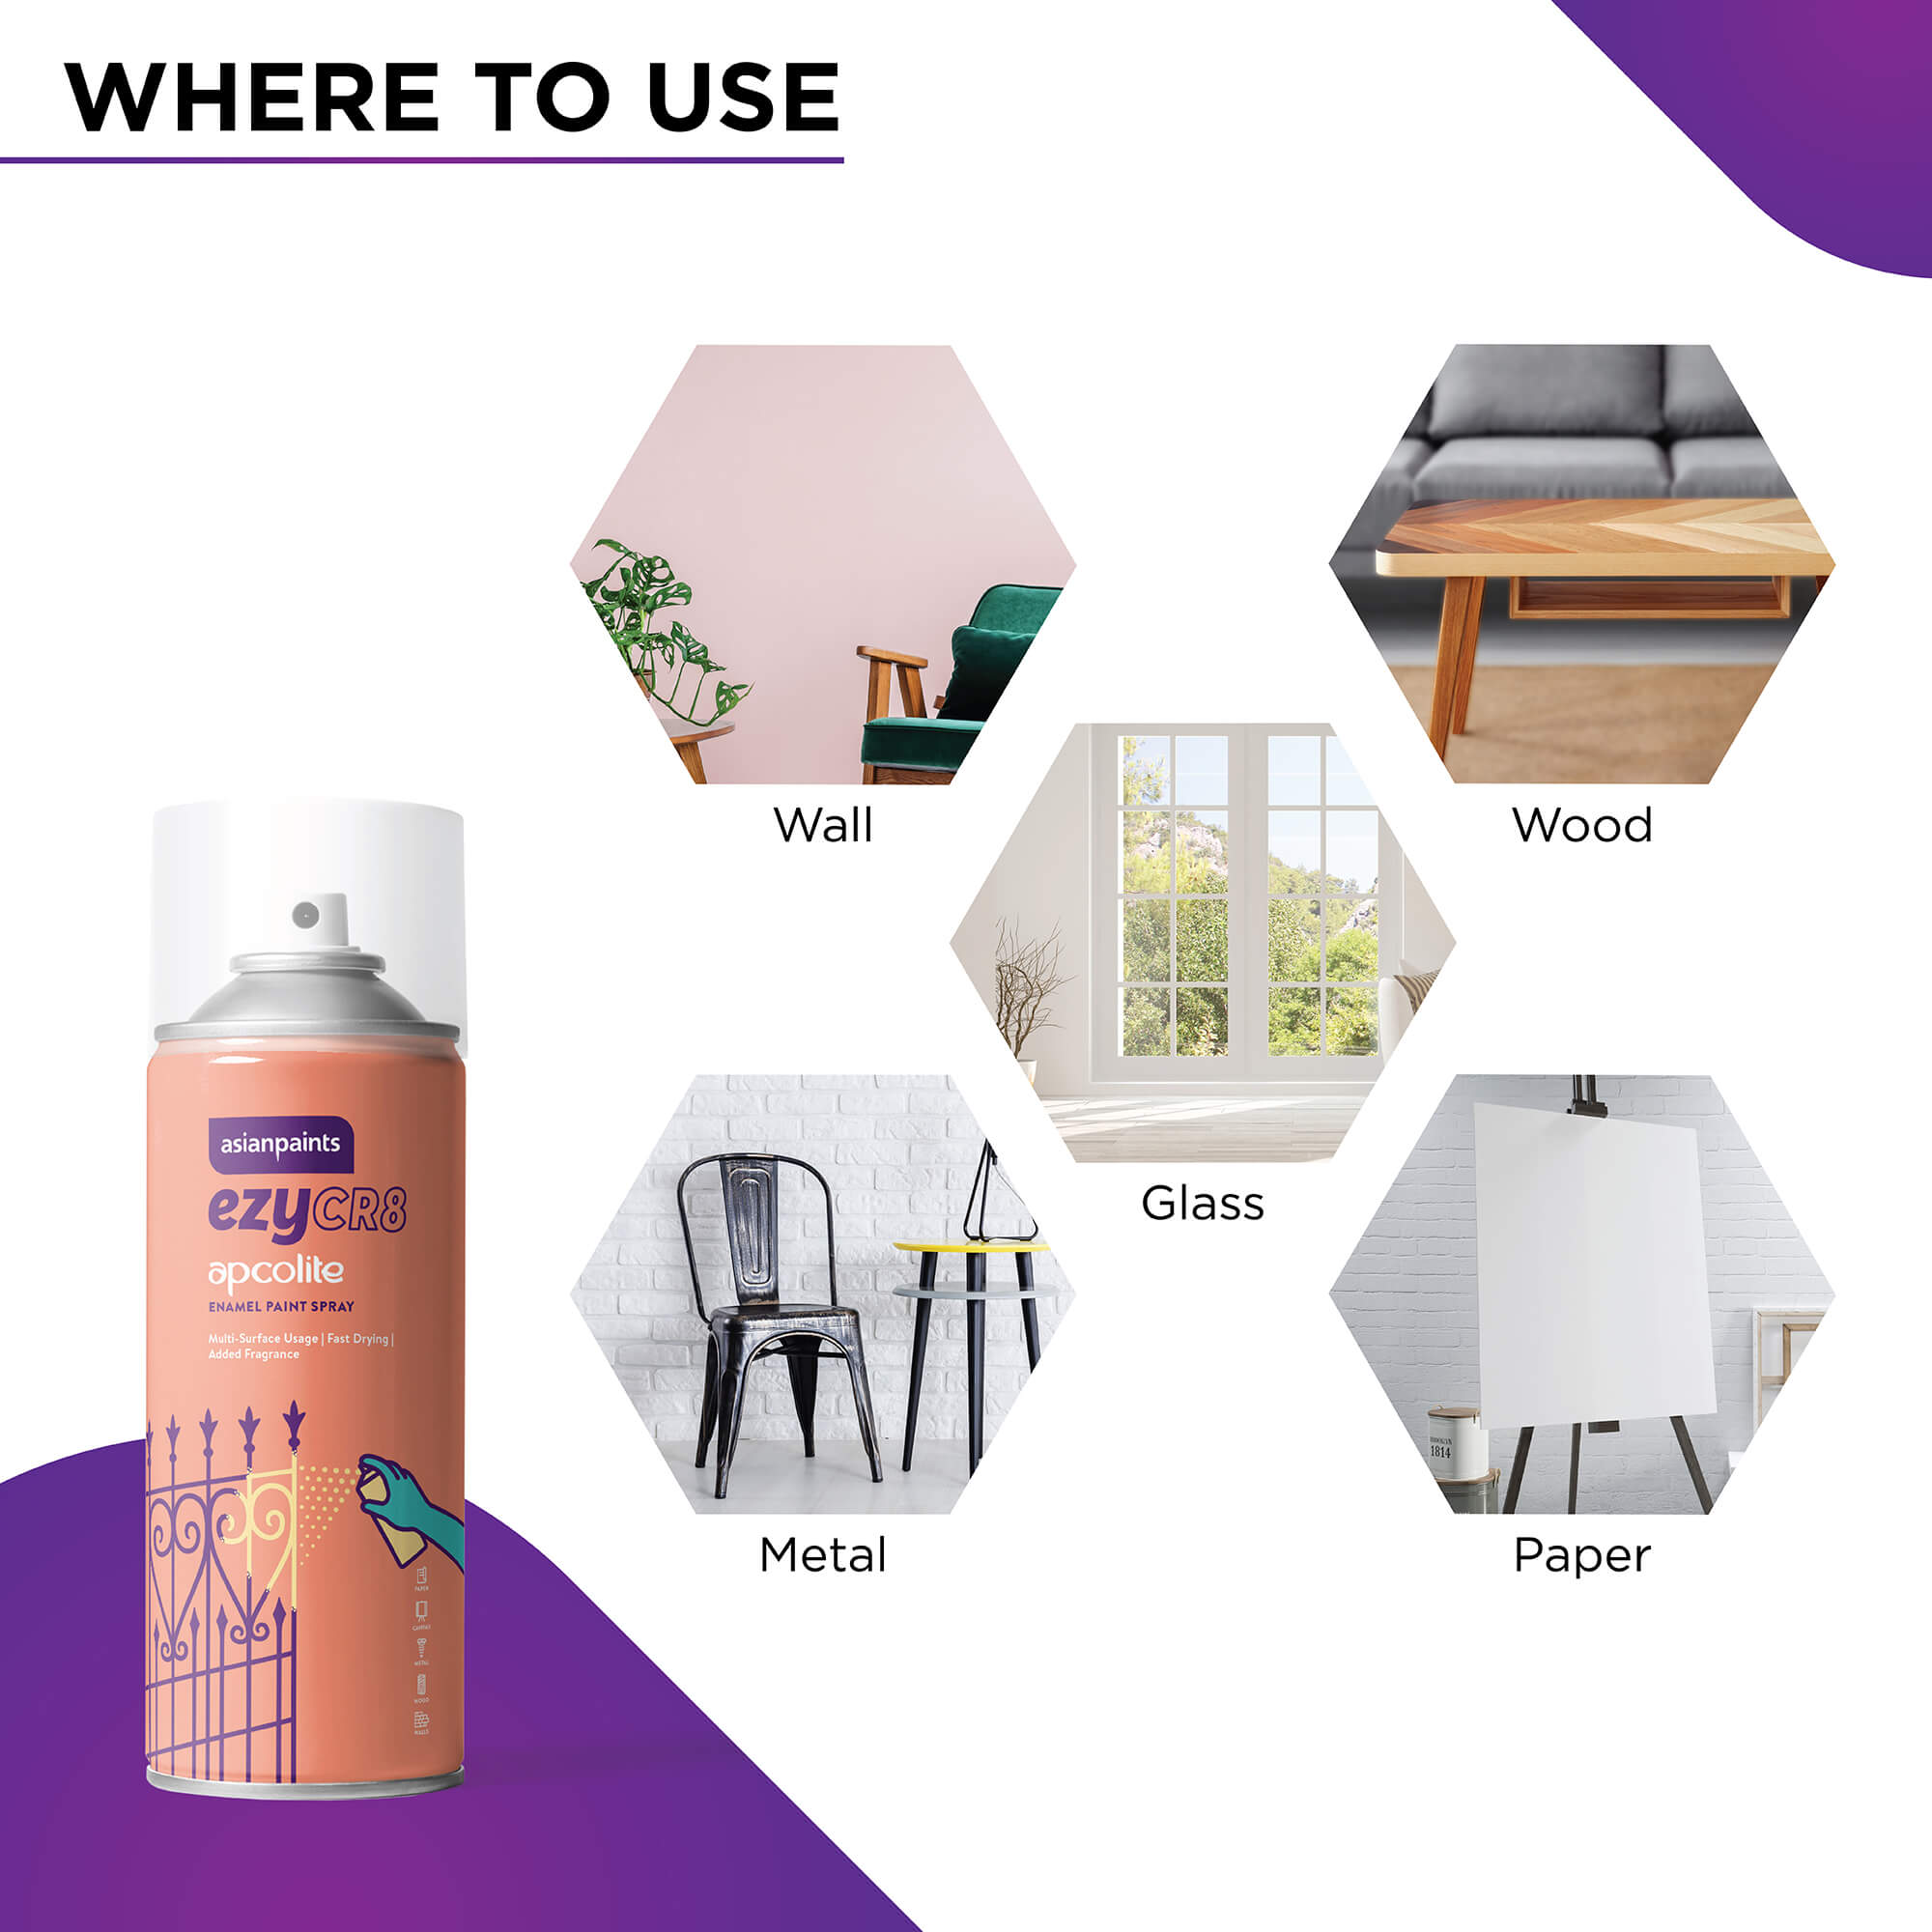 Asian Paints Frost Spray Translucent Matt Finishclear 125 g Clear Spray  Paint 200 ml Price in India - Buy Asian Paints Frost Spray Translucent Matt  Finishclear 125 g Clear Spray Paint 200